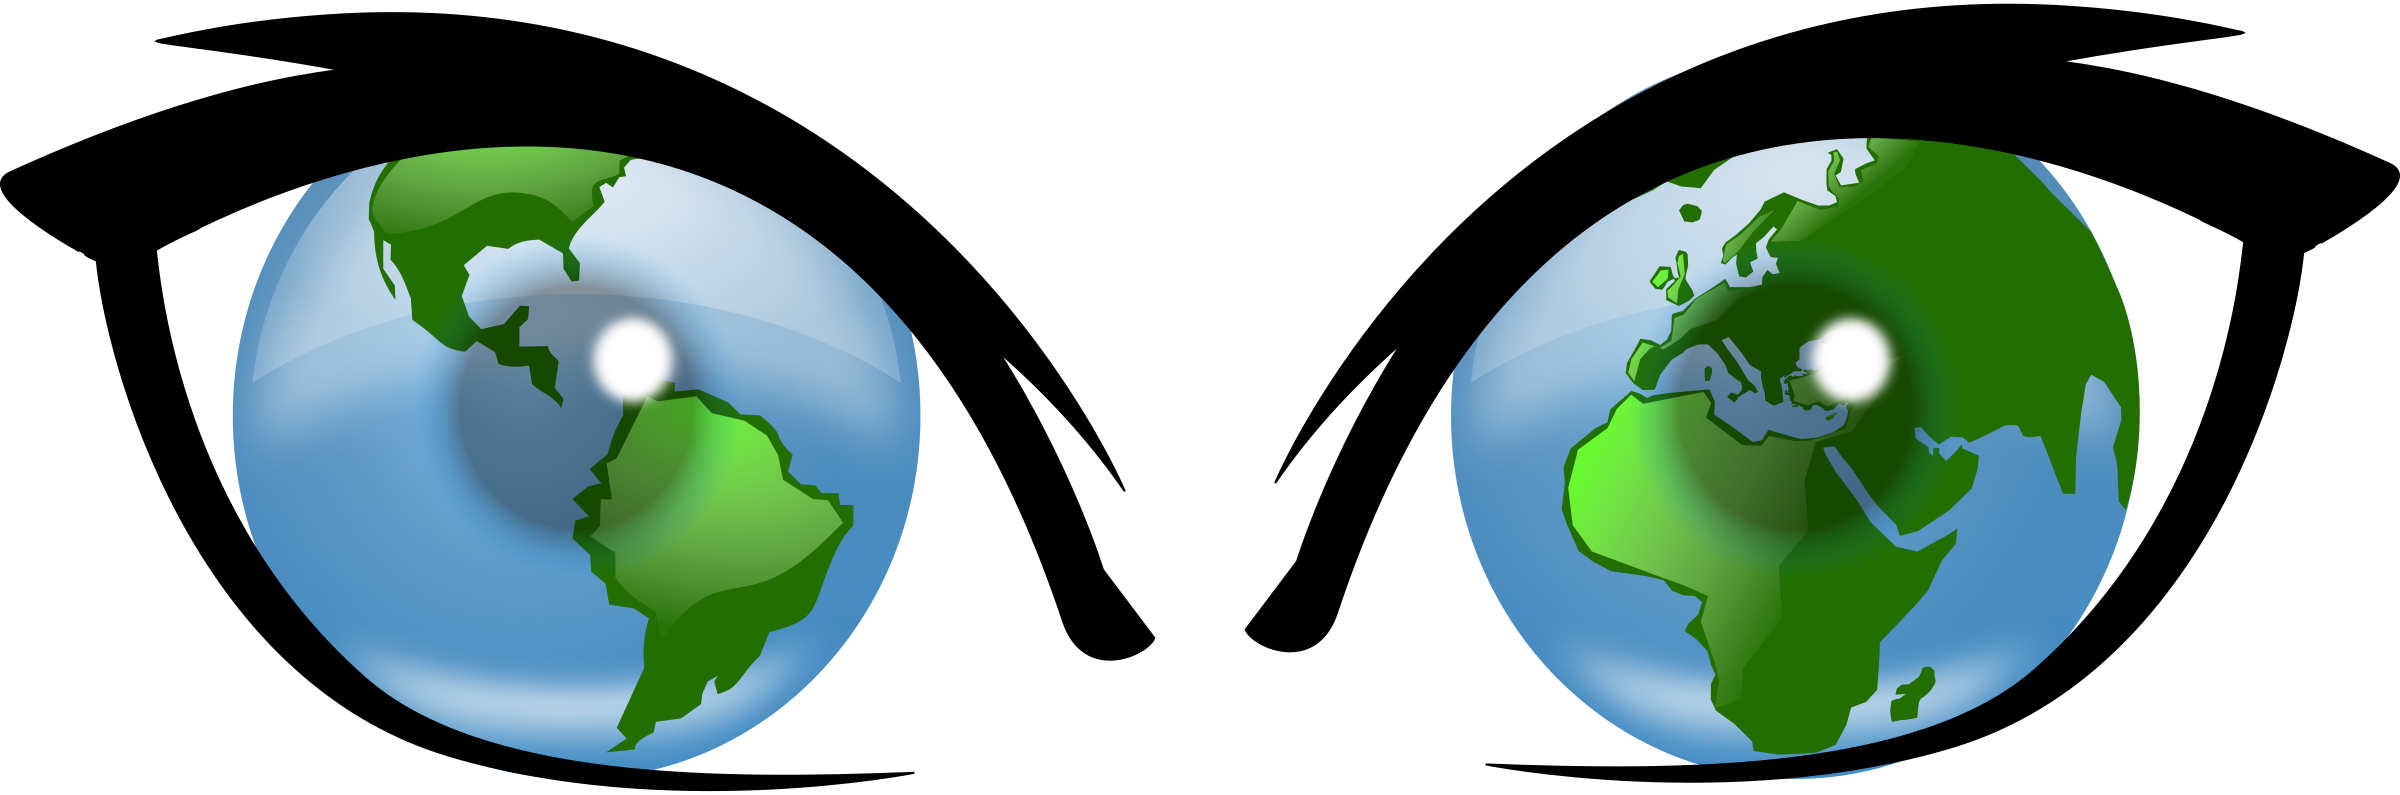 geography clipart global